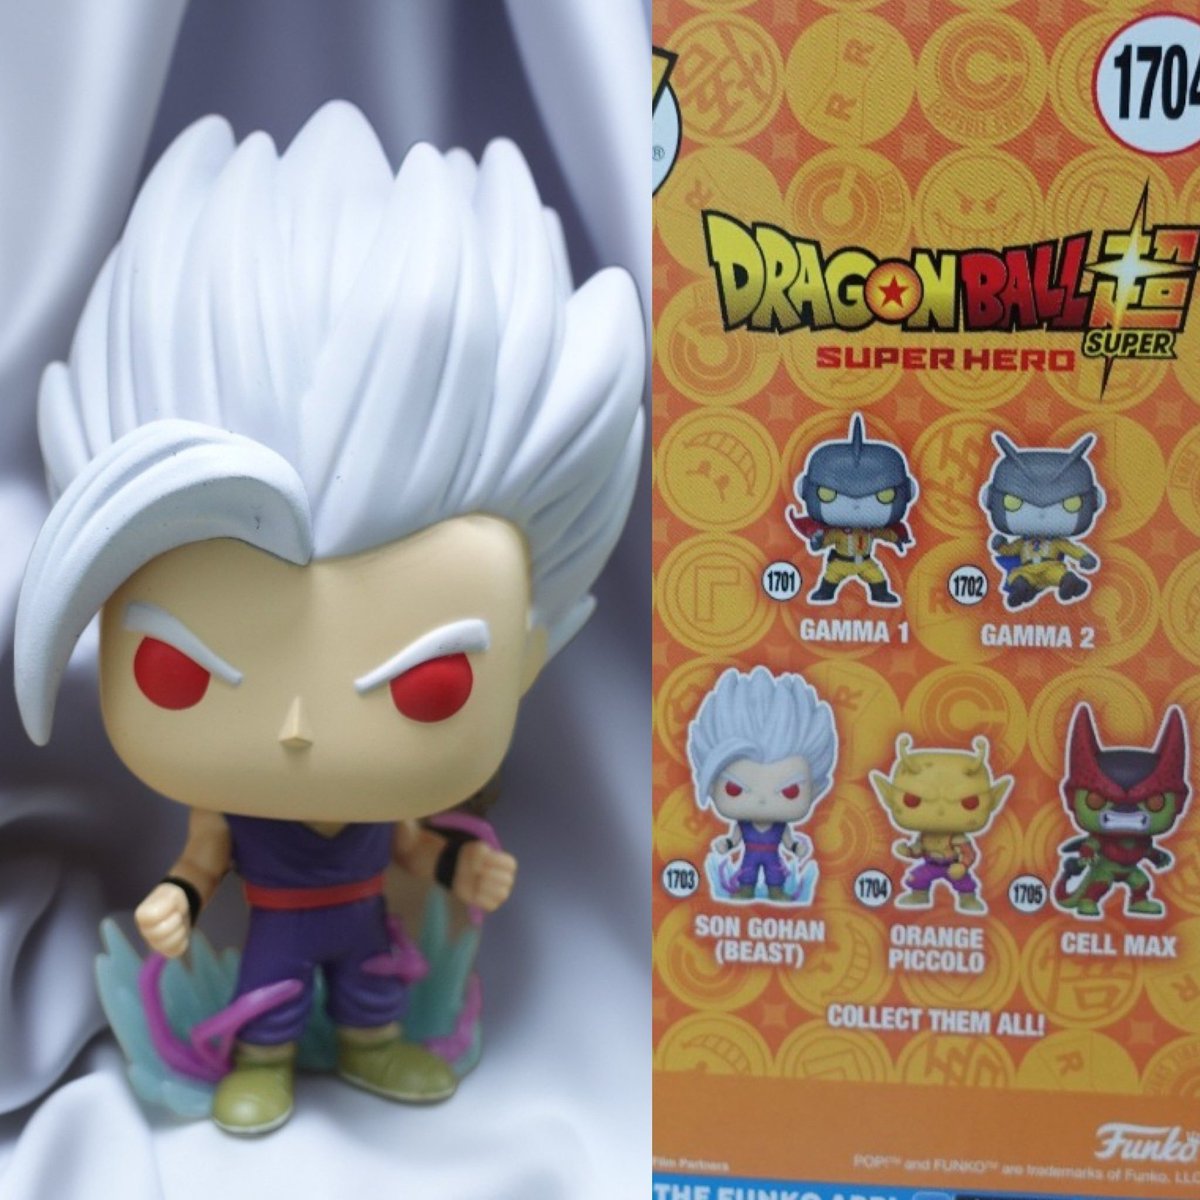 First look! Dragon Ball Super fans. Check out the brand new wave of Funko POPs! Thanks @funkoinfo_ ~ #DragonBallSuper #DBS #FPN #FunkoPOPNews #Funko #POP #Funkos #POPVinyl #FunkoPOP #FunkoPOPs #FunkoSoda